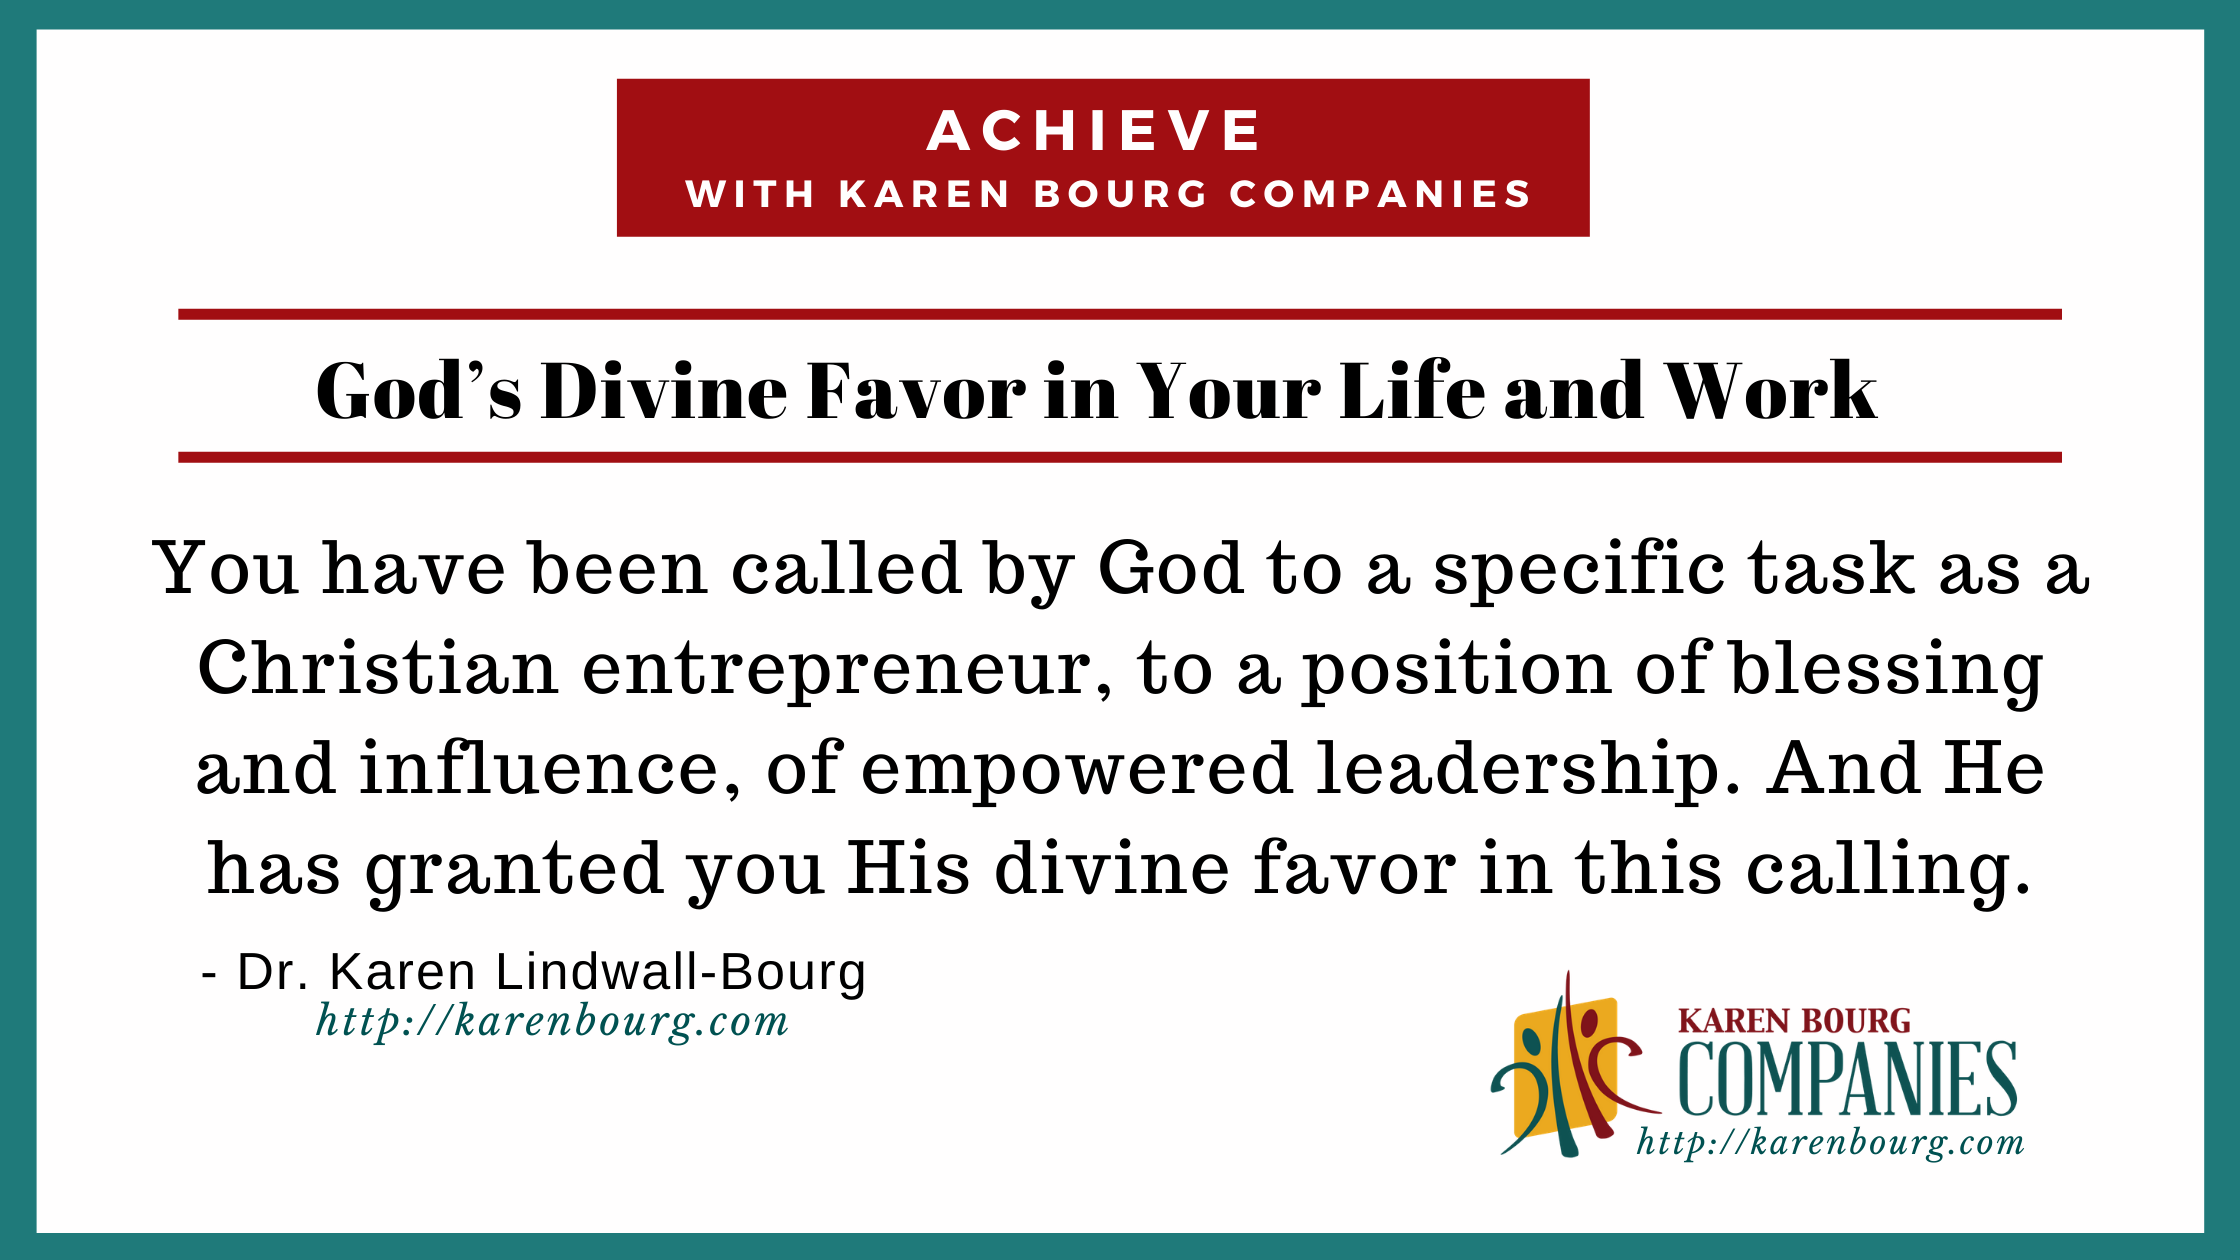 God’s Divine Favor in Your Life and Work